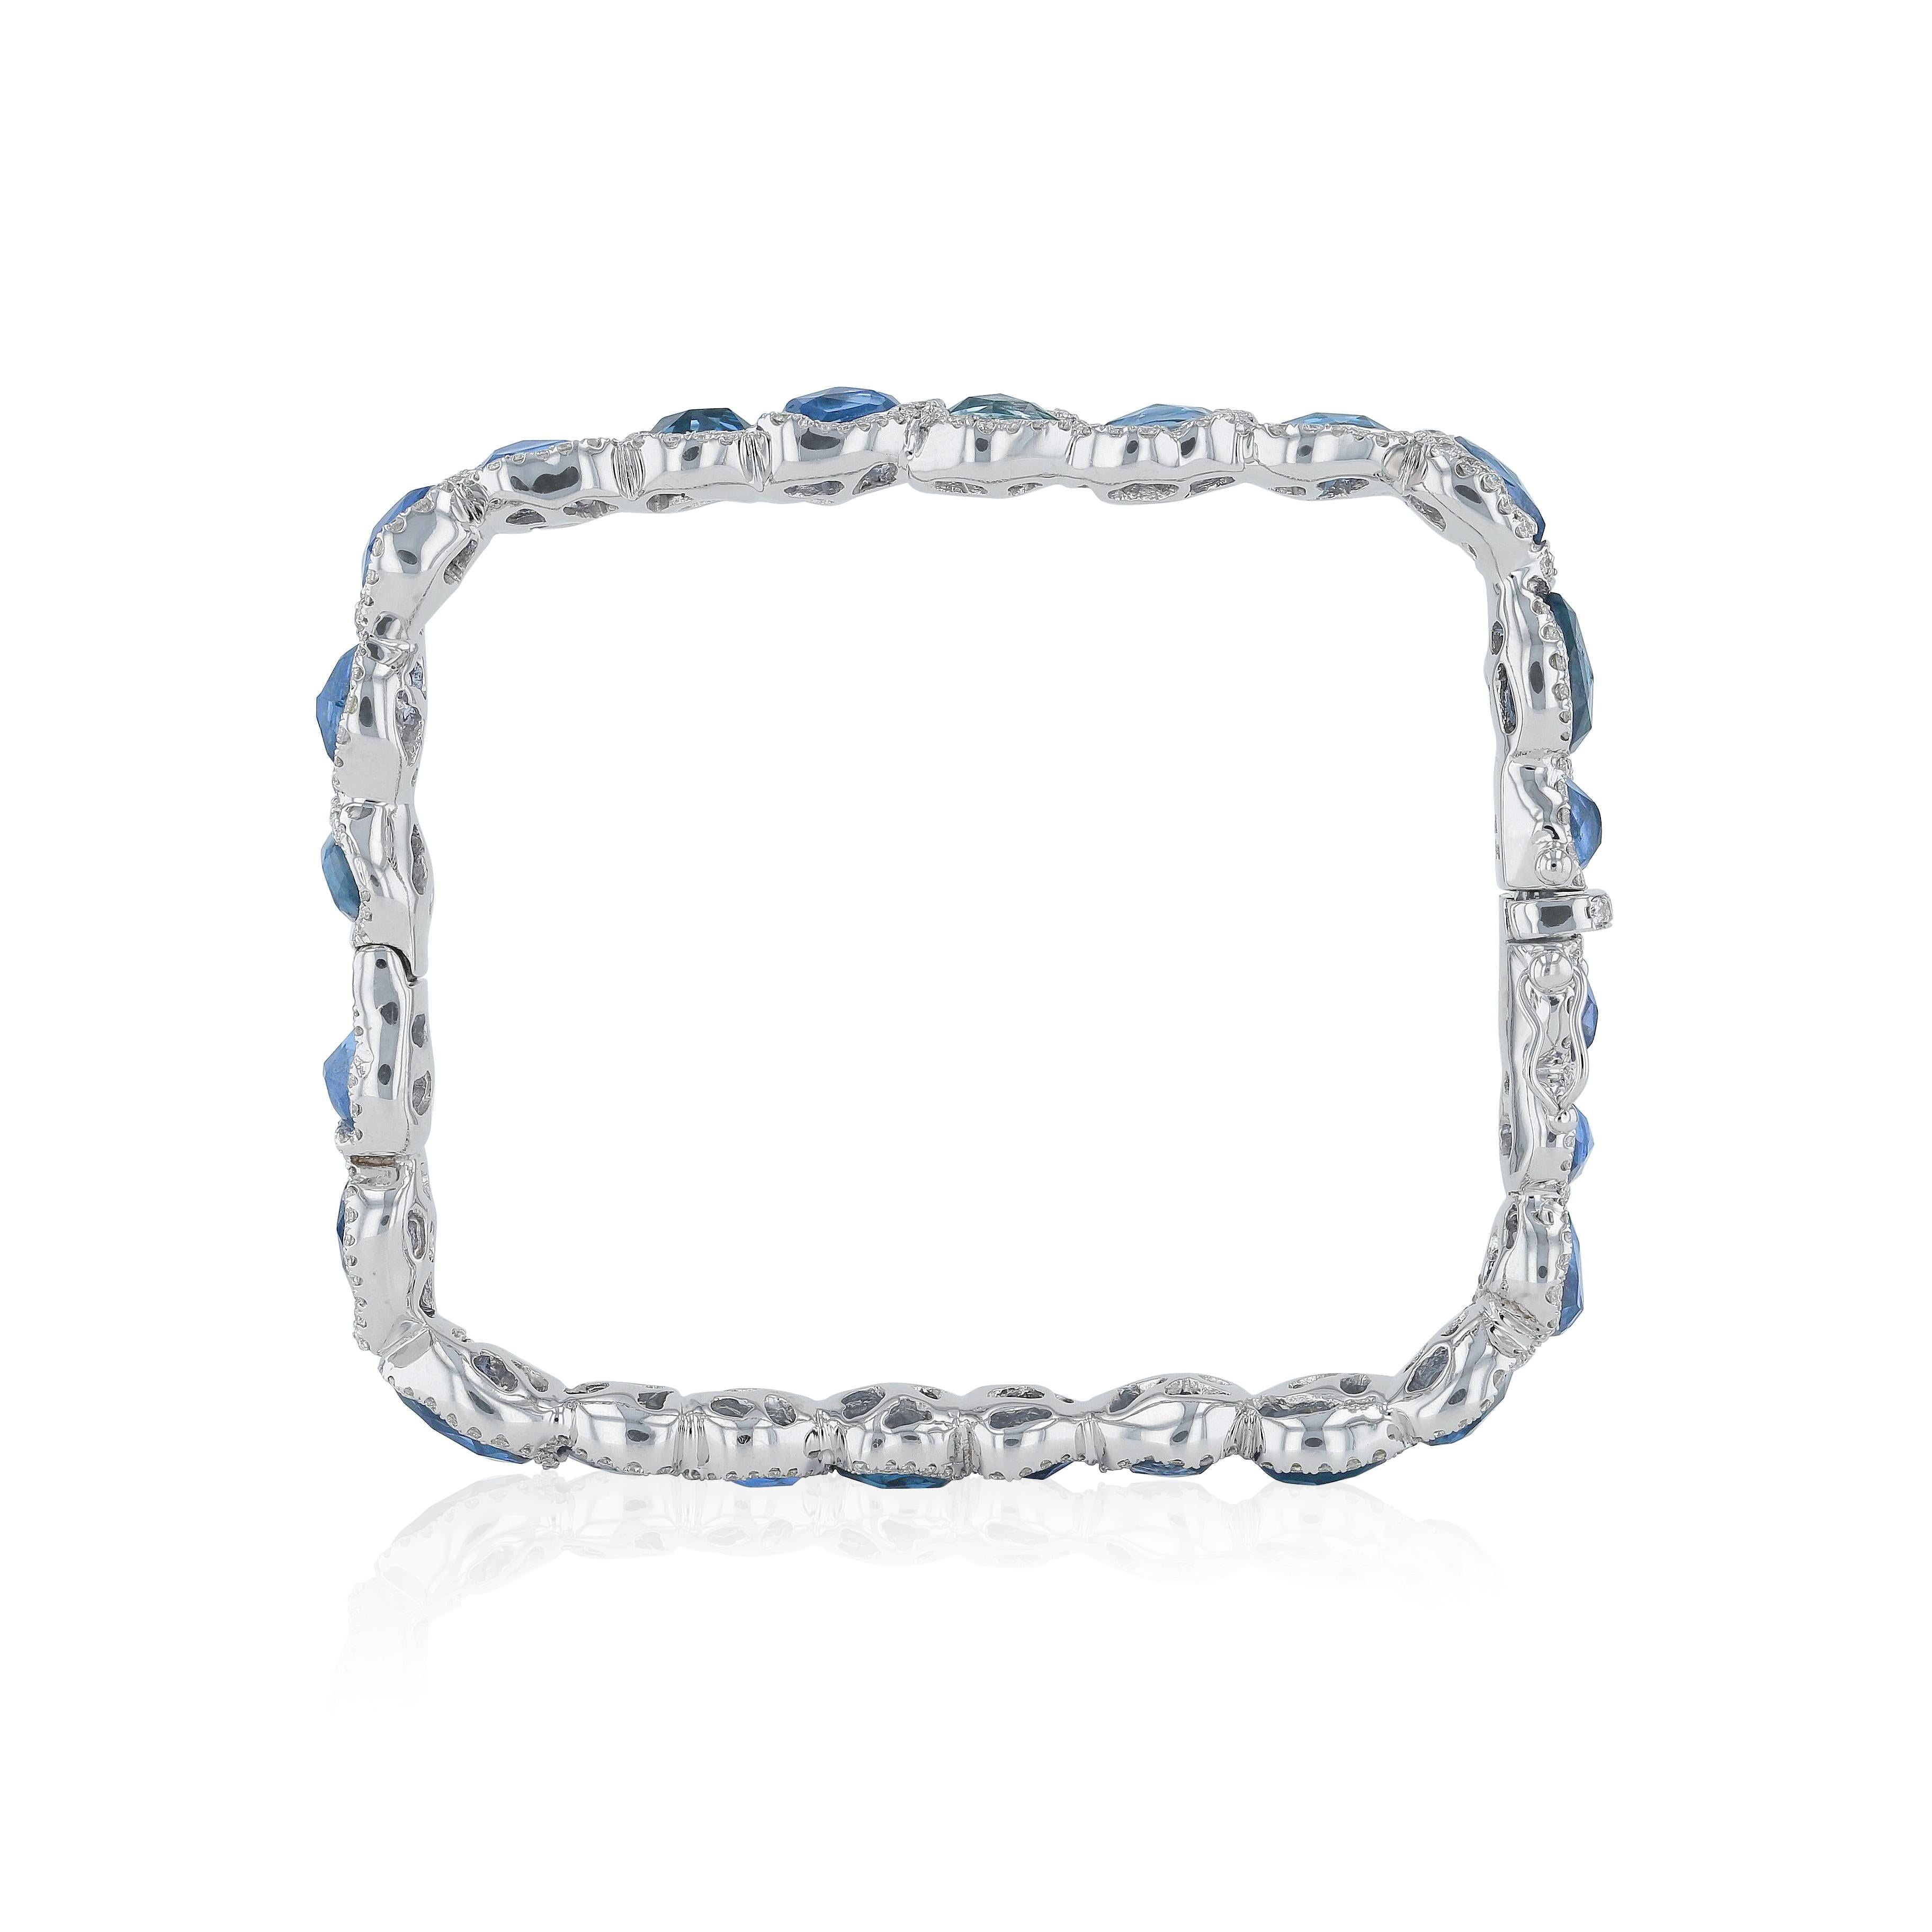 Modern craftmanship and design, this bracelet is designed for bold and unique women. It is defenitely a statement piece inspired by bold aesthetic and natural raw beauty. 
- Diamonds (Total Carat Weight: 1.88 ct) 
- Blue Sapphires (Total Weight: